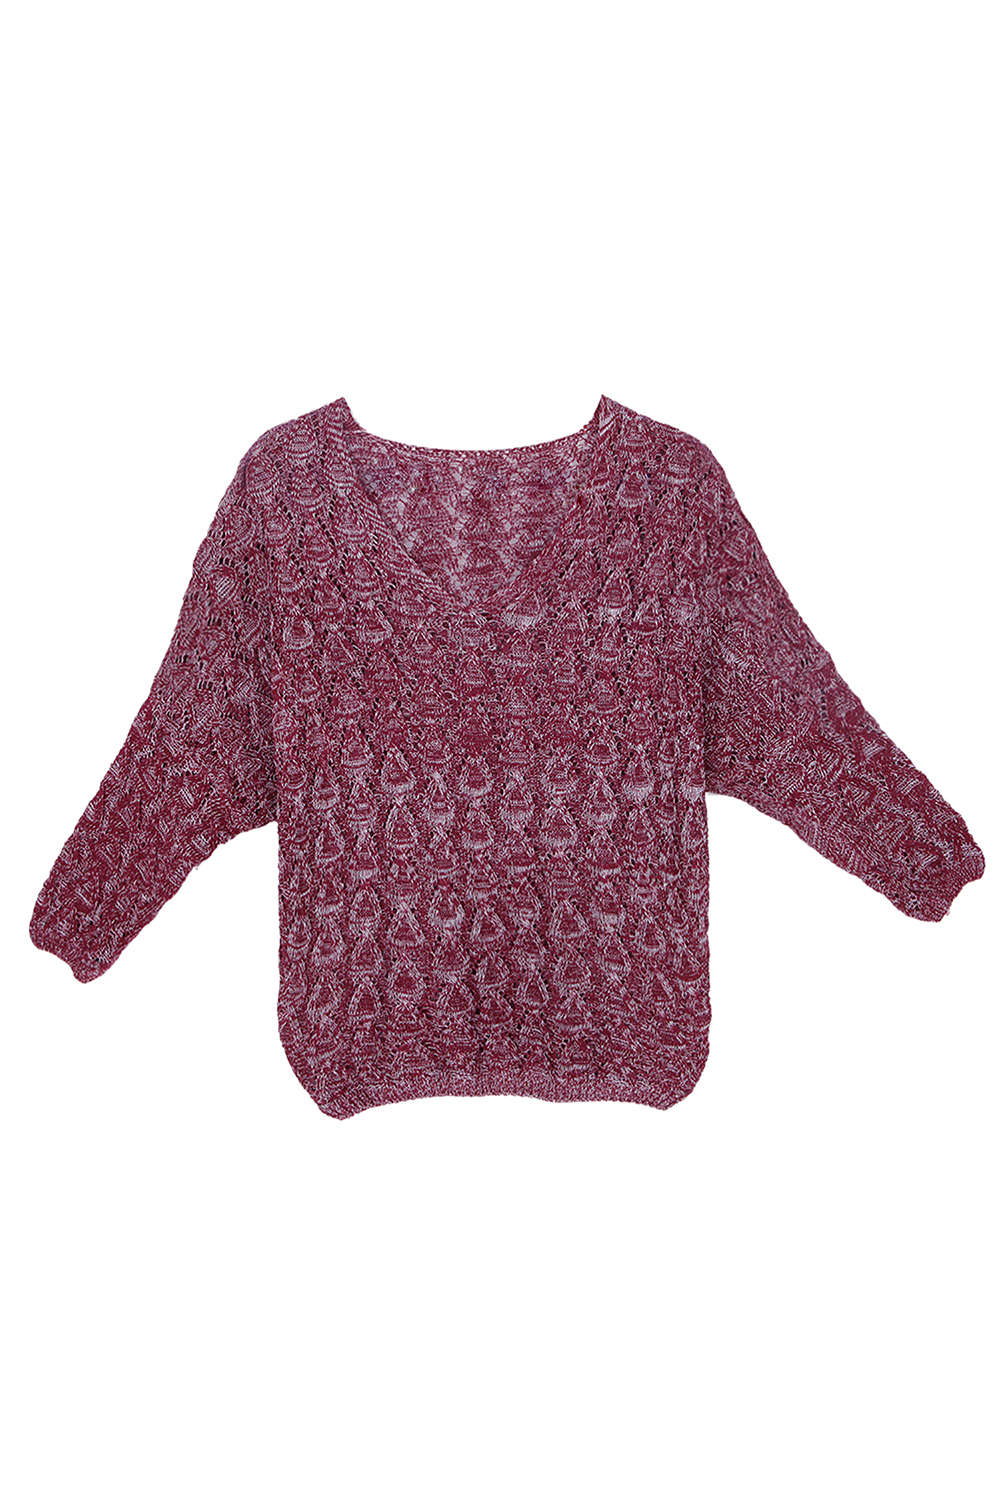 Iyasson Long Sleeve Loose Pullover Knitted Sweater